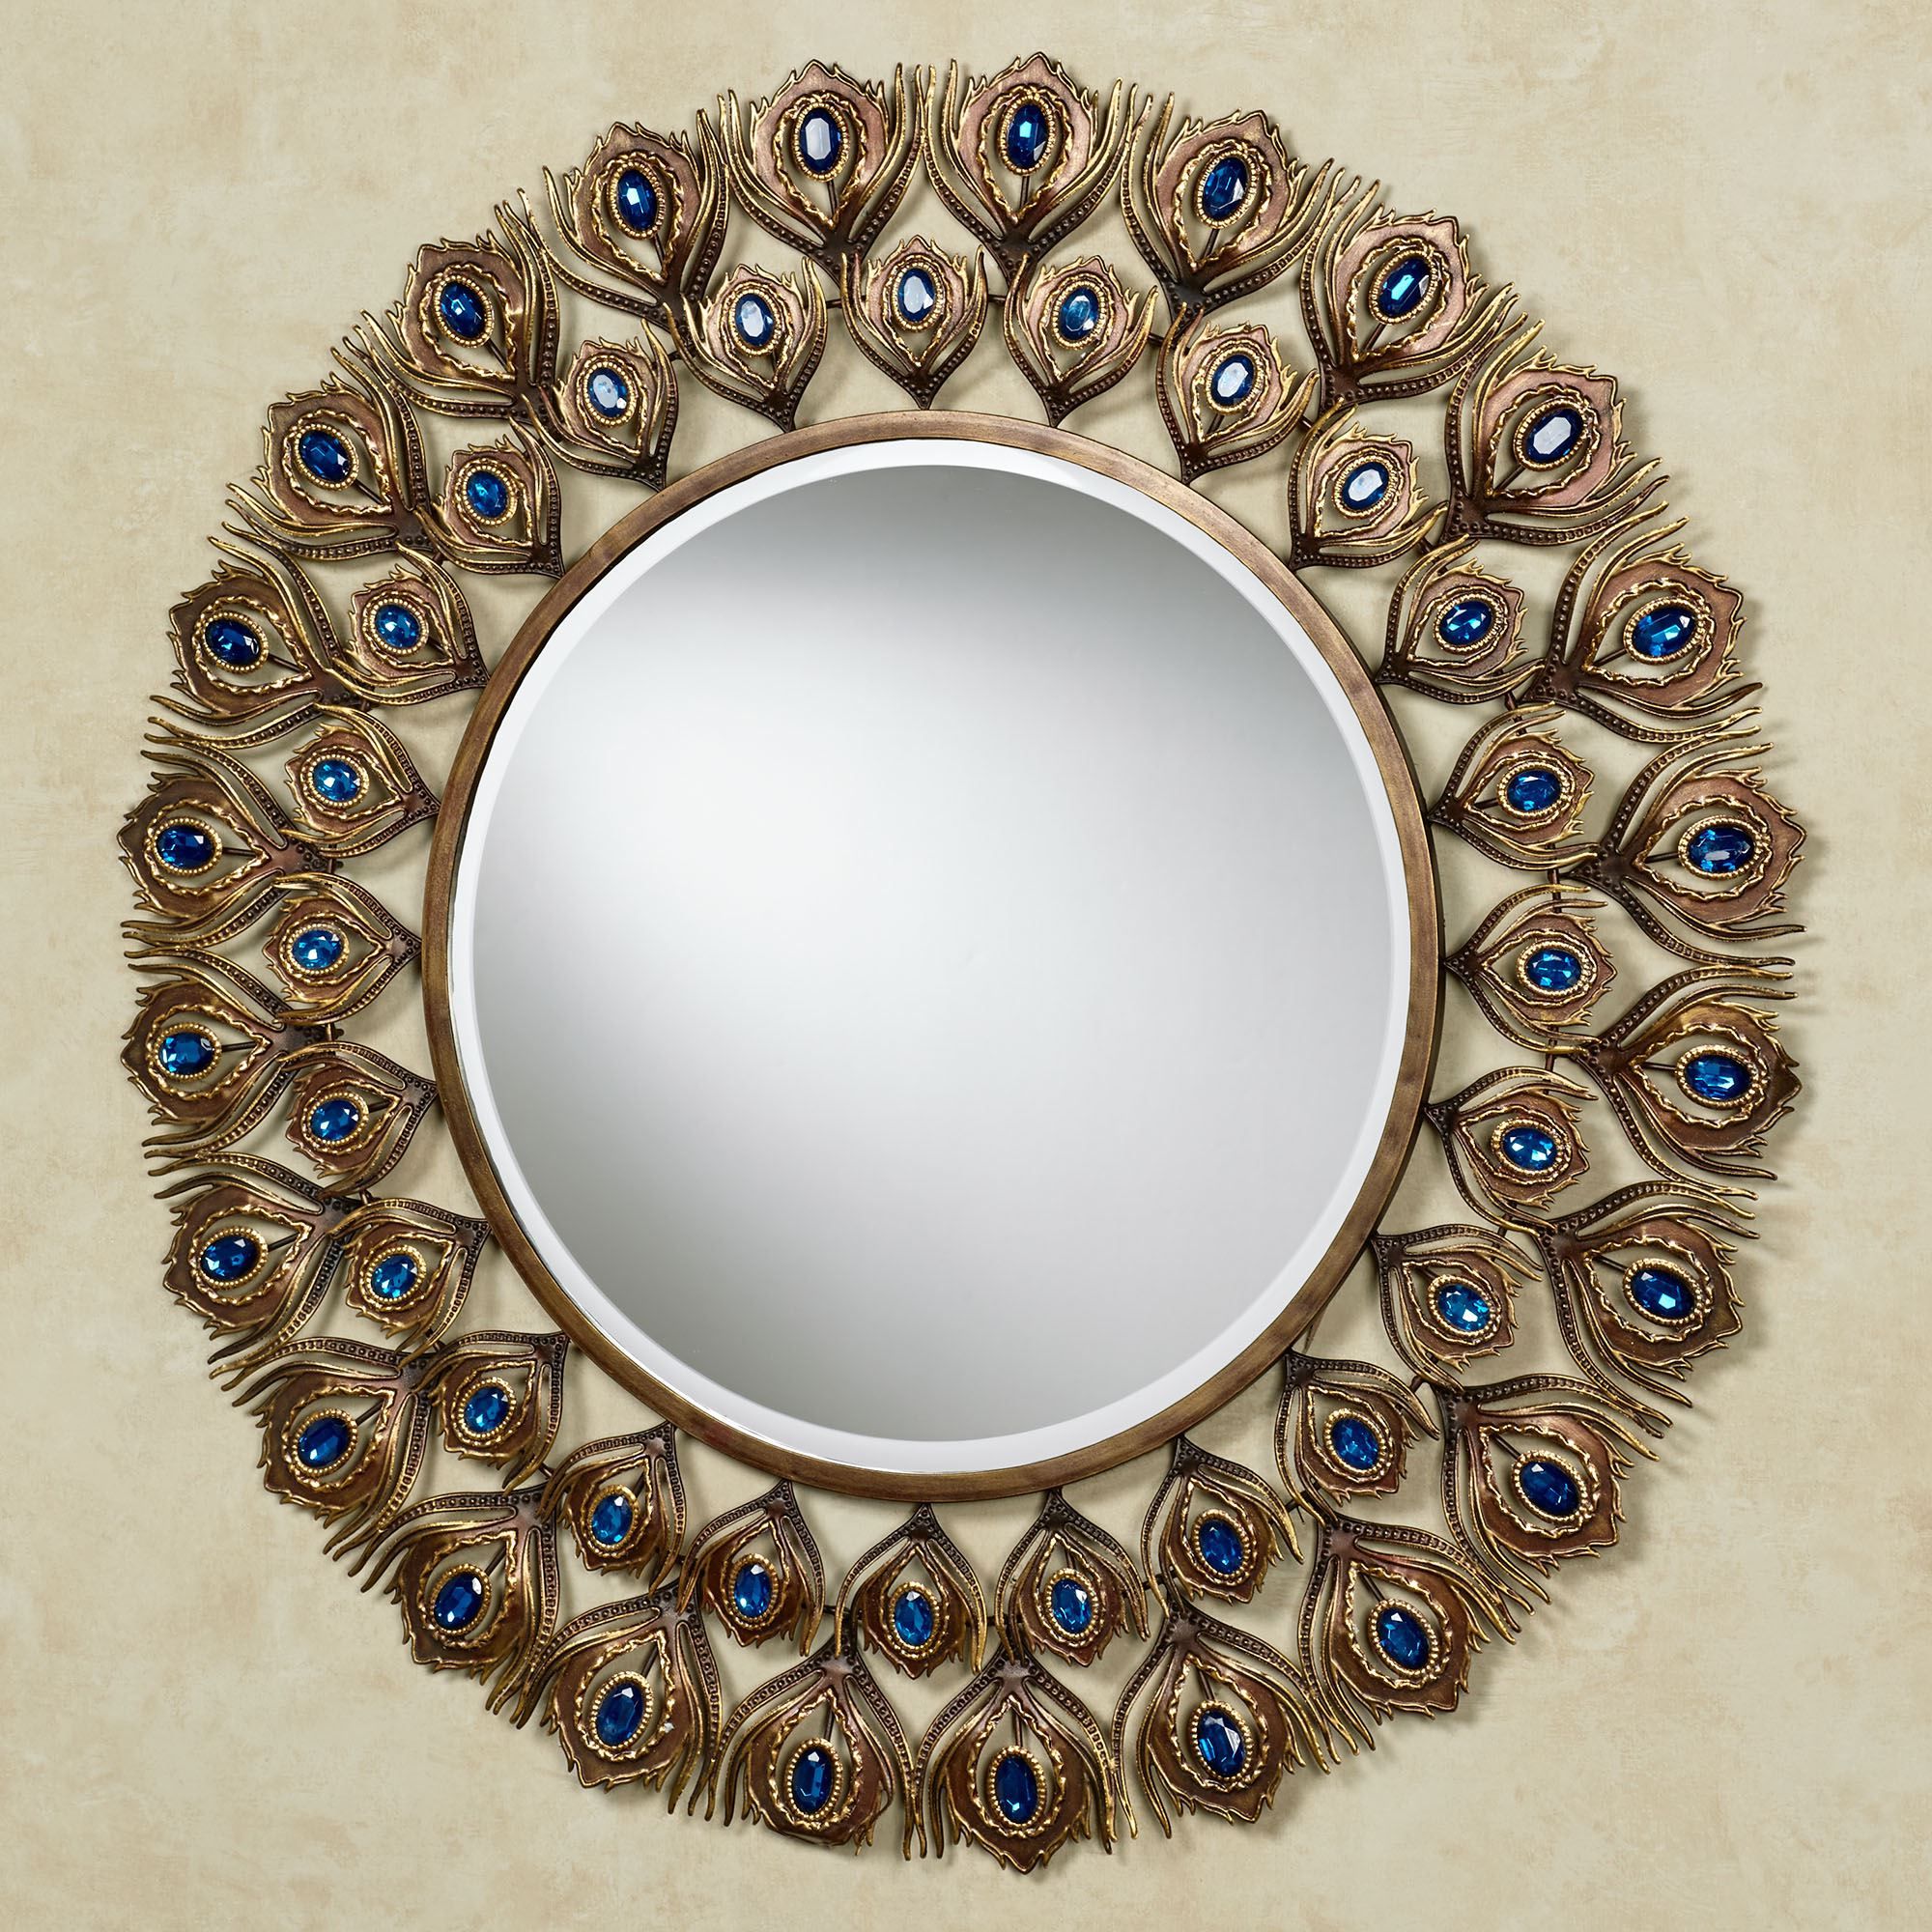 Royal Peacock Jeweled Round Wall Mirror Intended For Widely Used Round Scalloped Wall Mirrors (View 2 of 15)